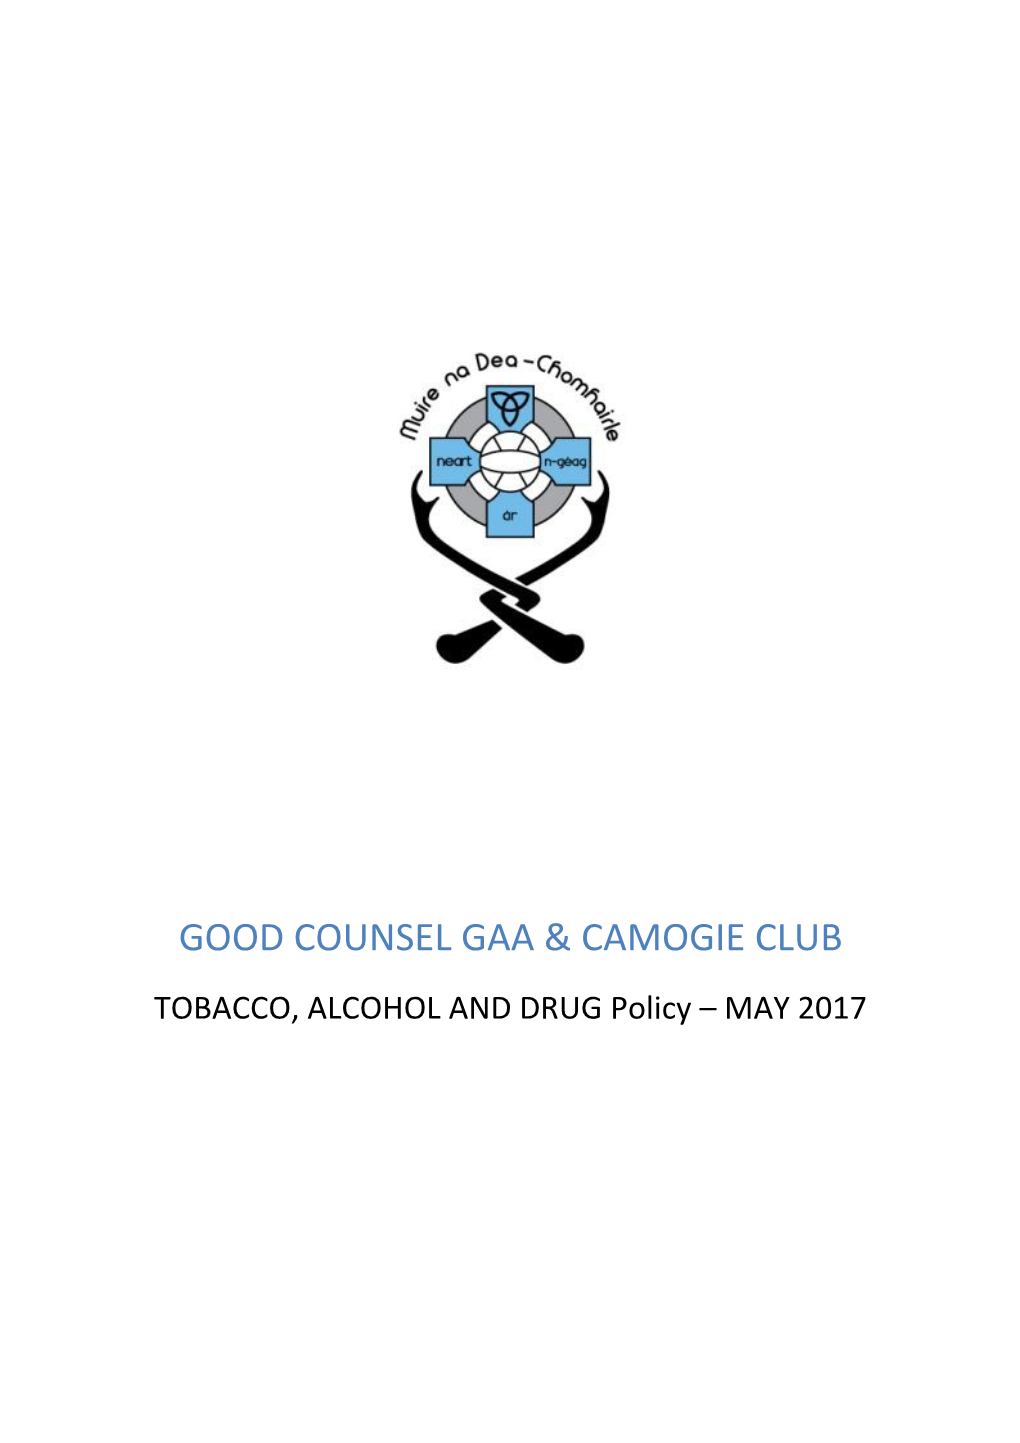 Tobacco, Alcohol and Drug Policy